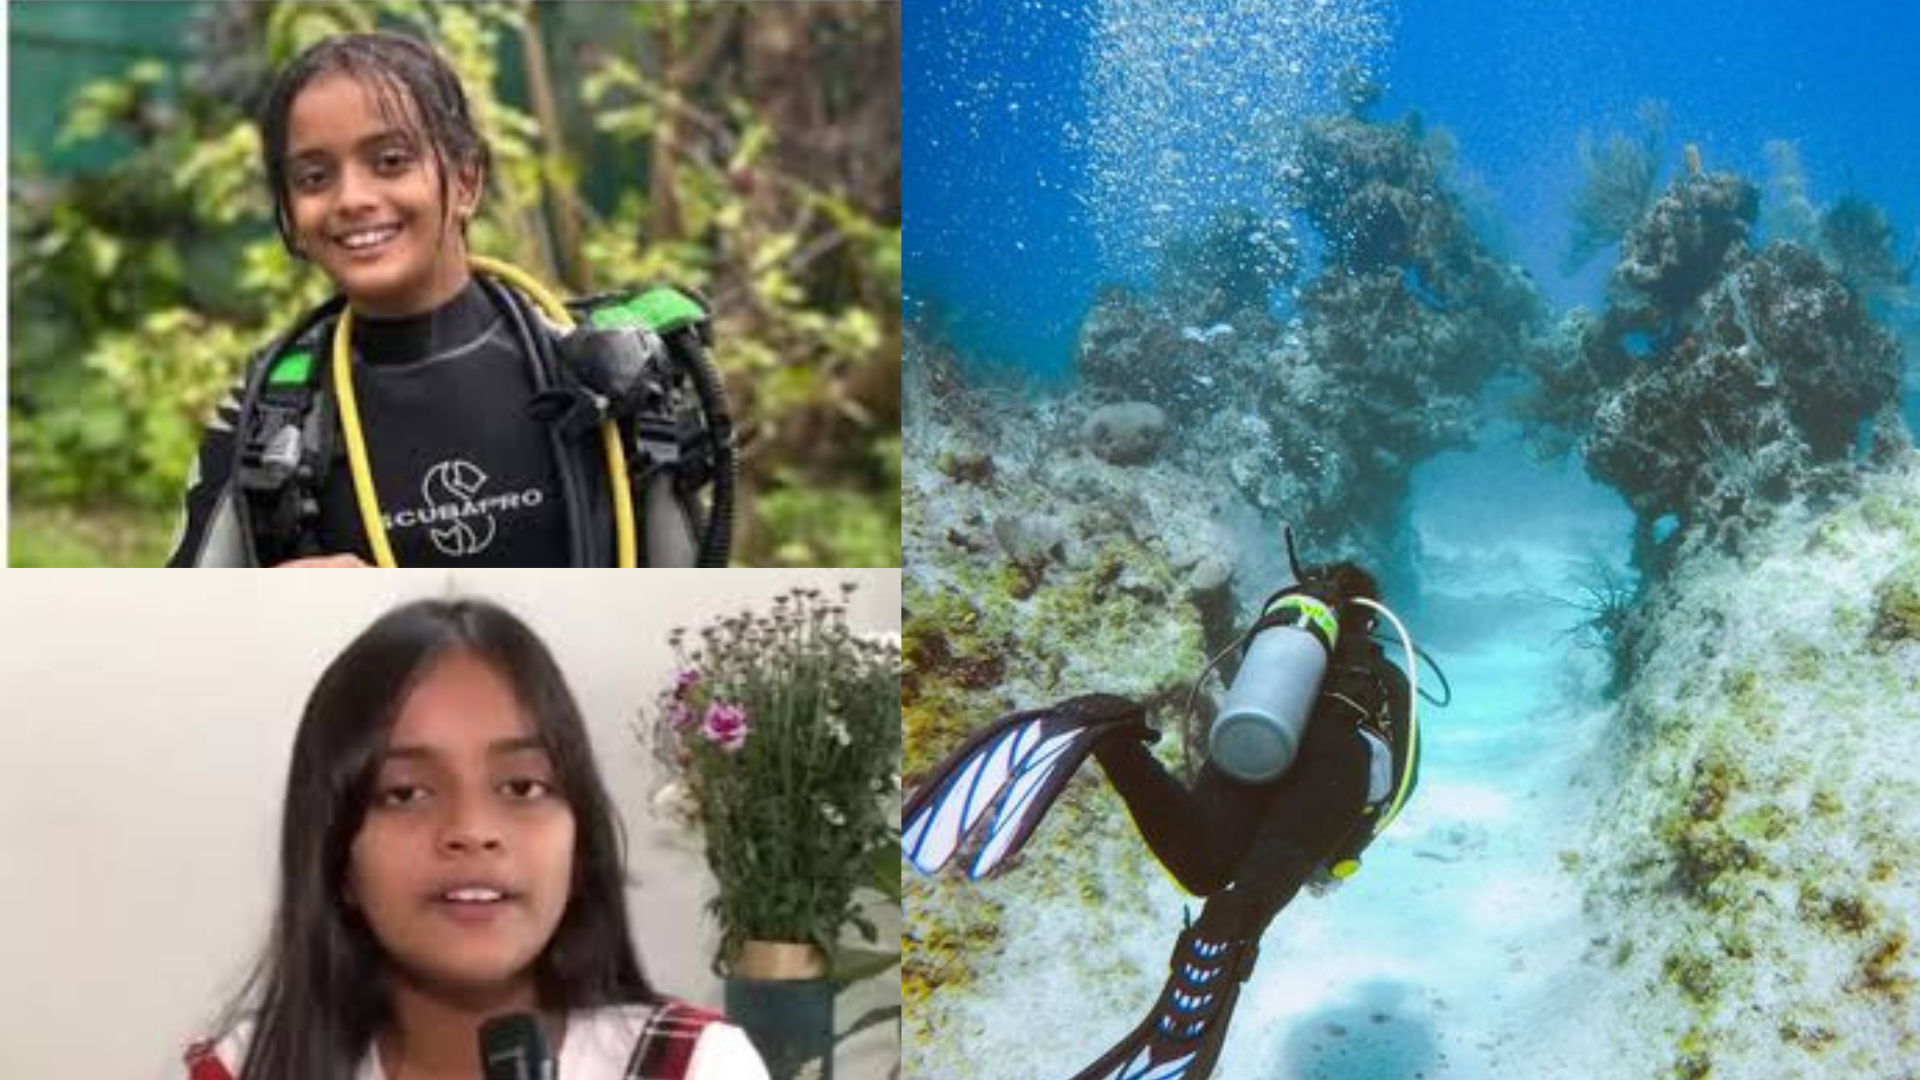 Kyna Khare Girl Sets Record: World’s Youngest Female Master Scuba Diver